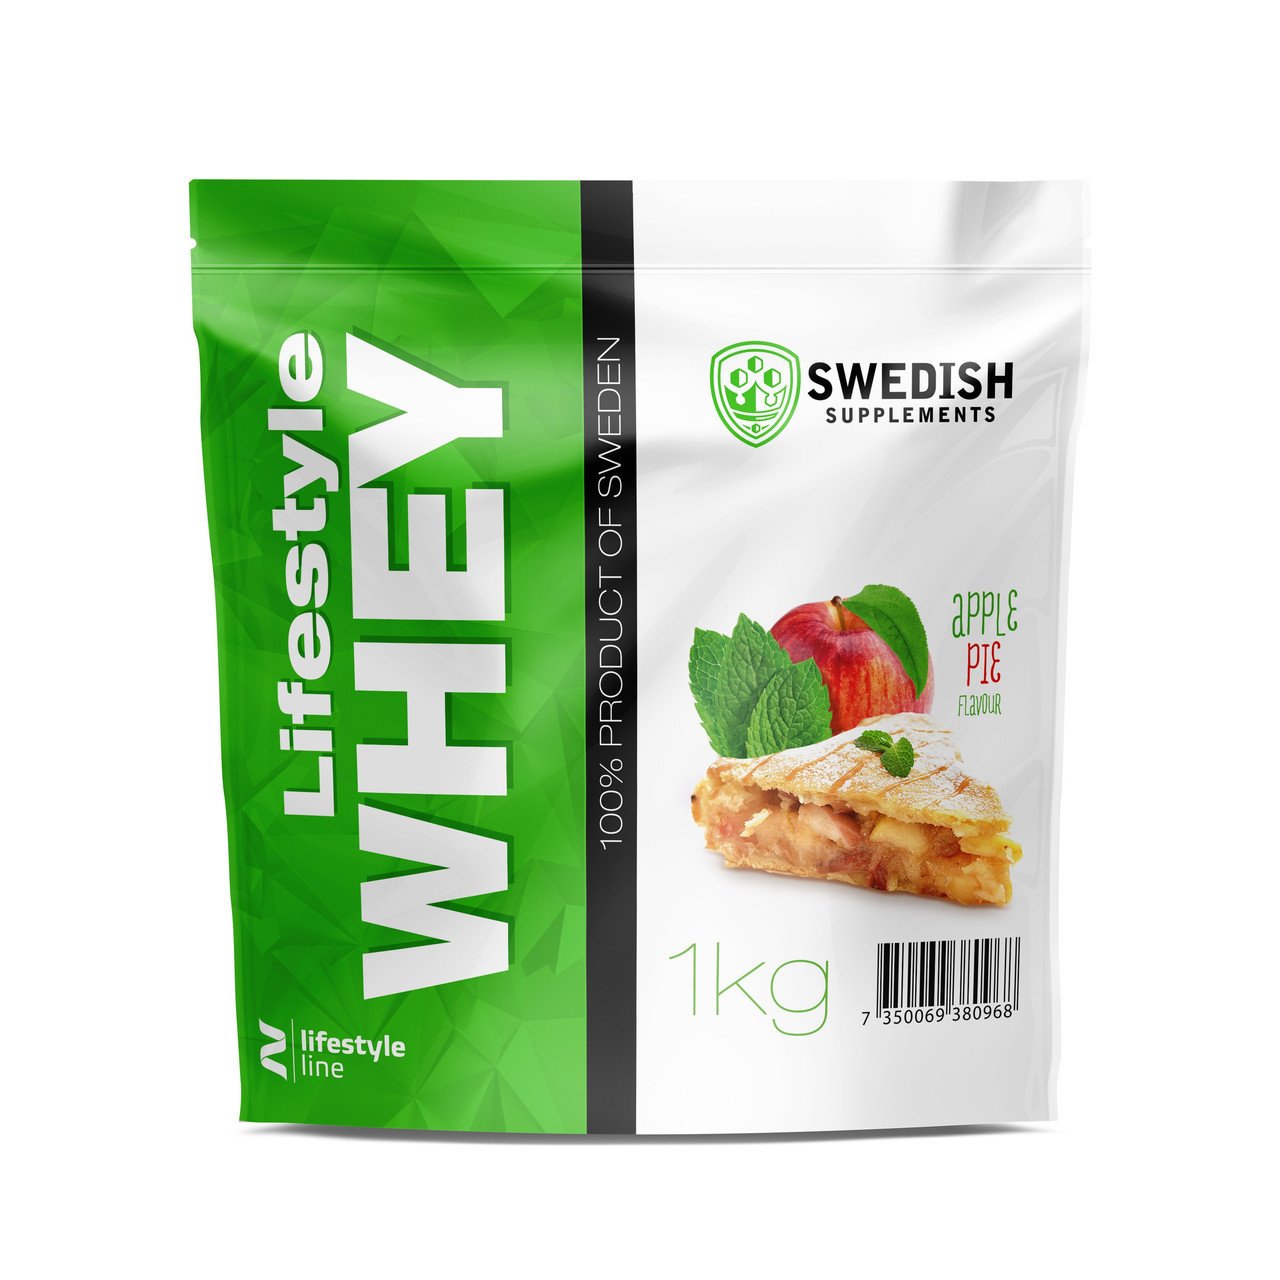 LS Whey Protein, 1000 ml, Swedish Supplements. Whey Protein. recovery Anti-catabolic properties Lean muscle mass 